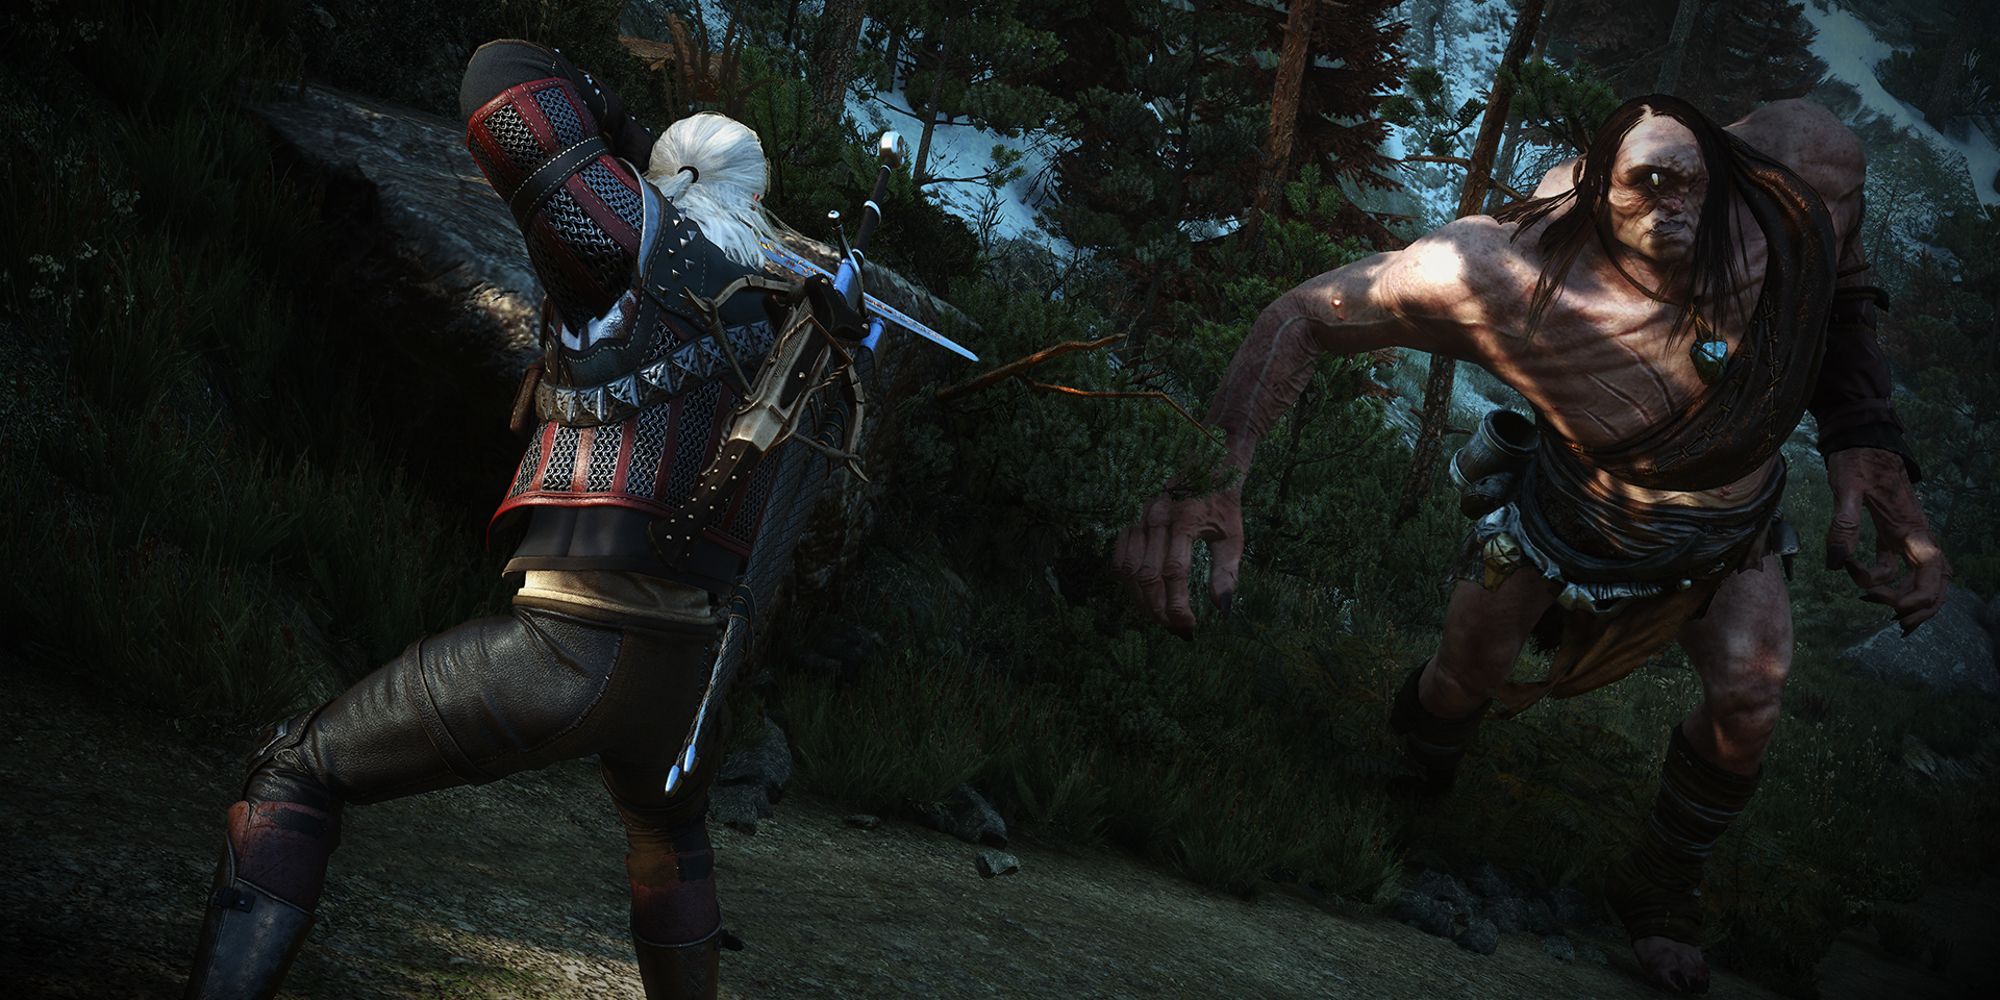 The Witcher 3 Geralt Ready To Battle A Giant Cyclops